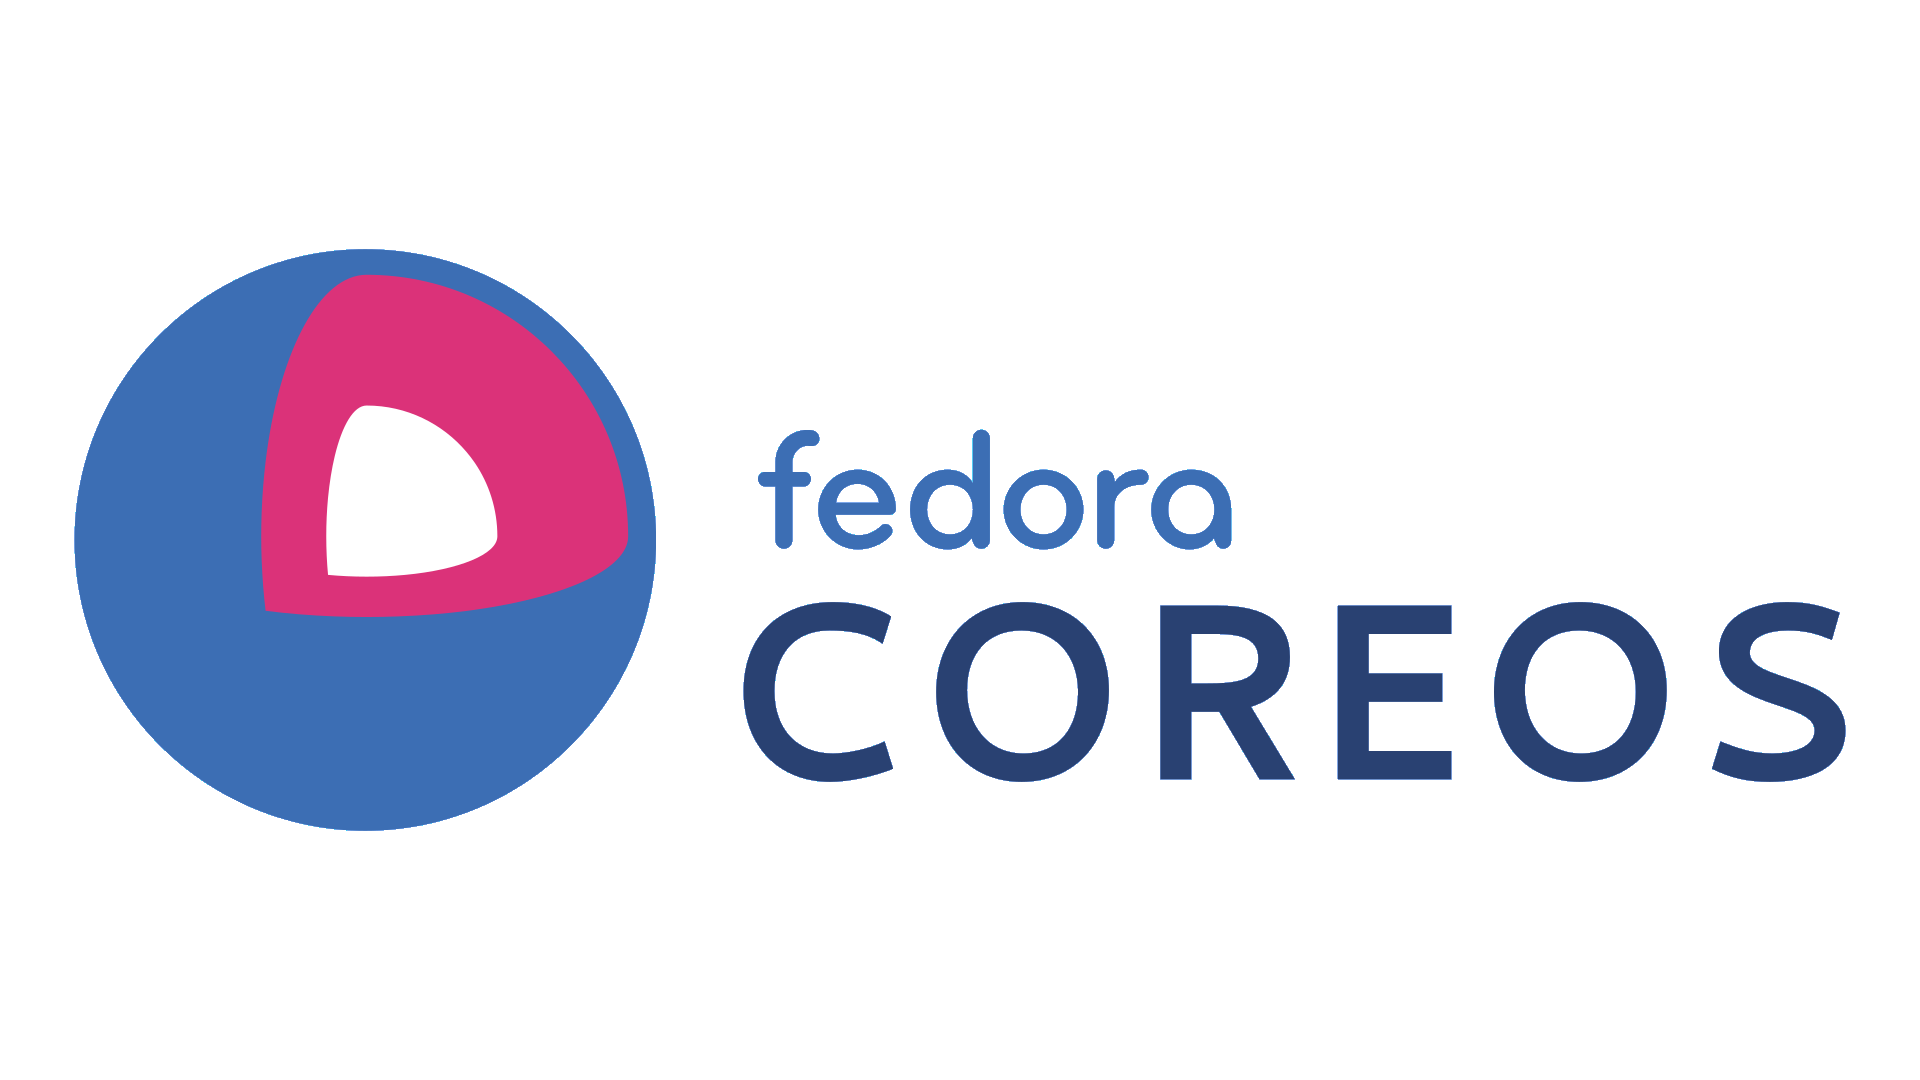 Partitions creation in Fedora CoreOS